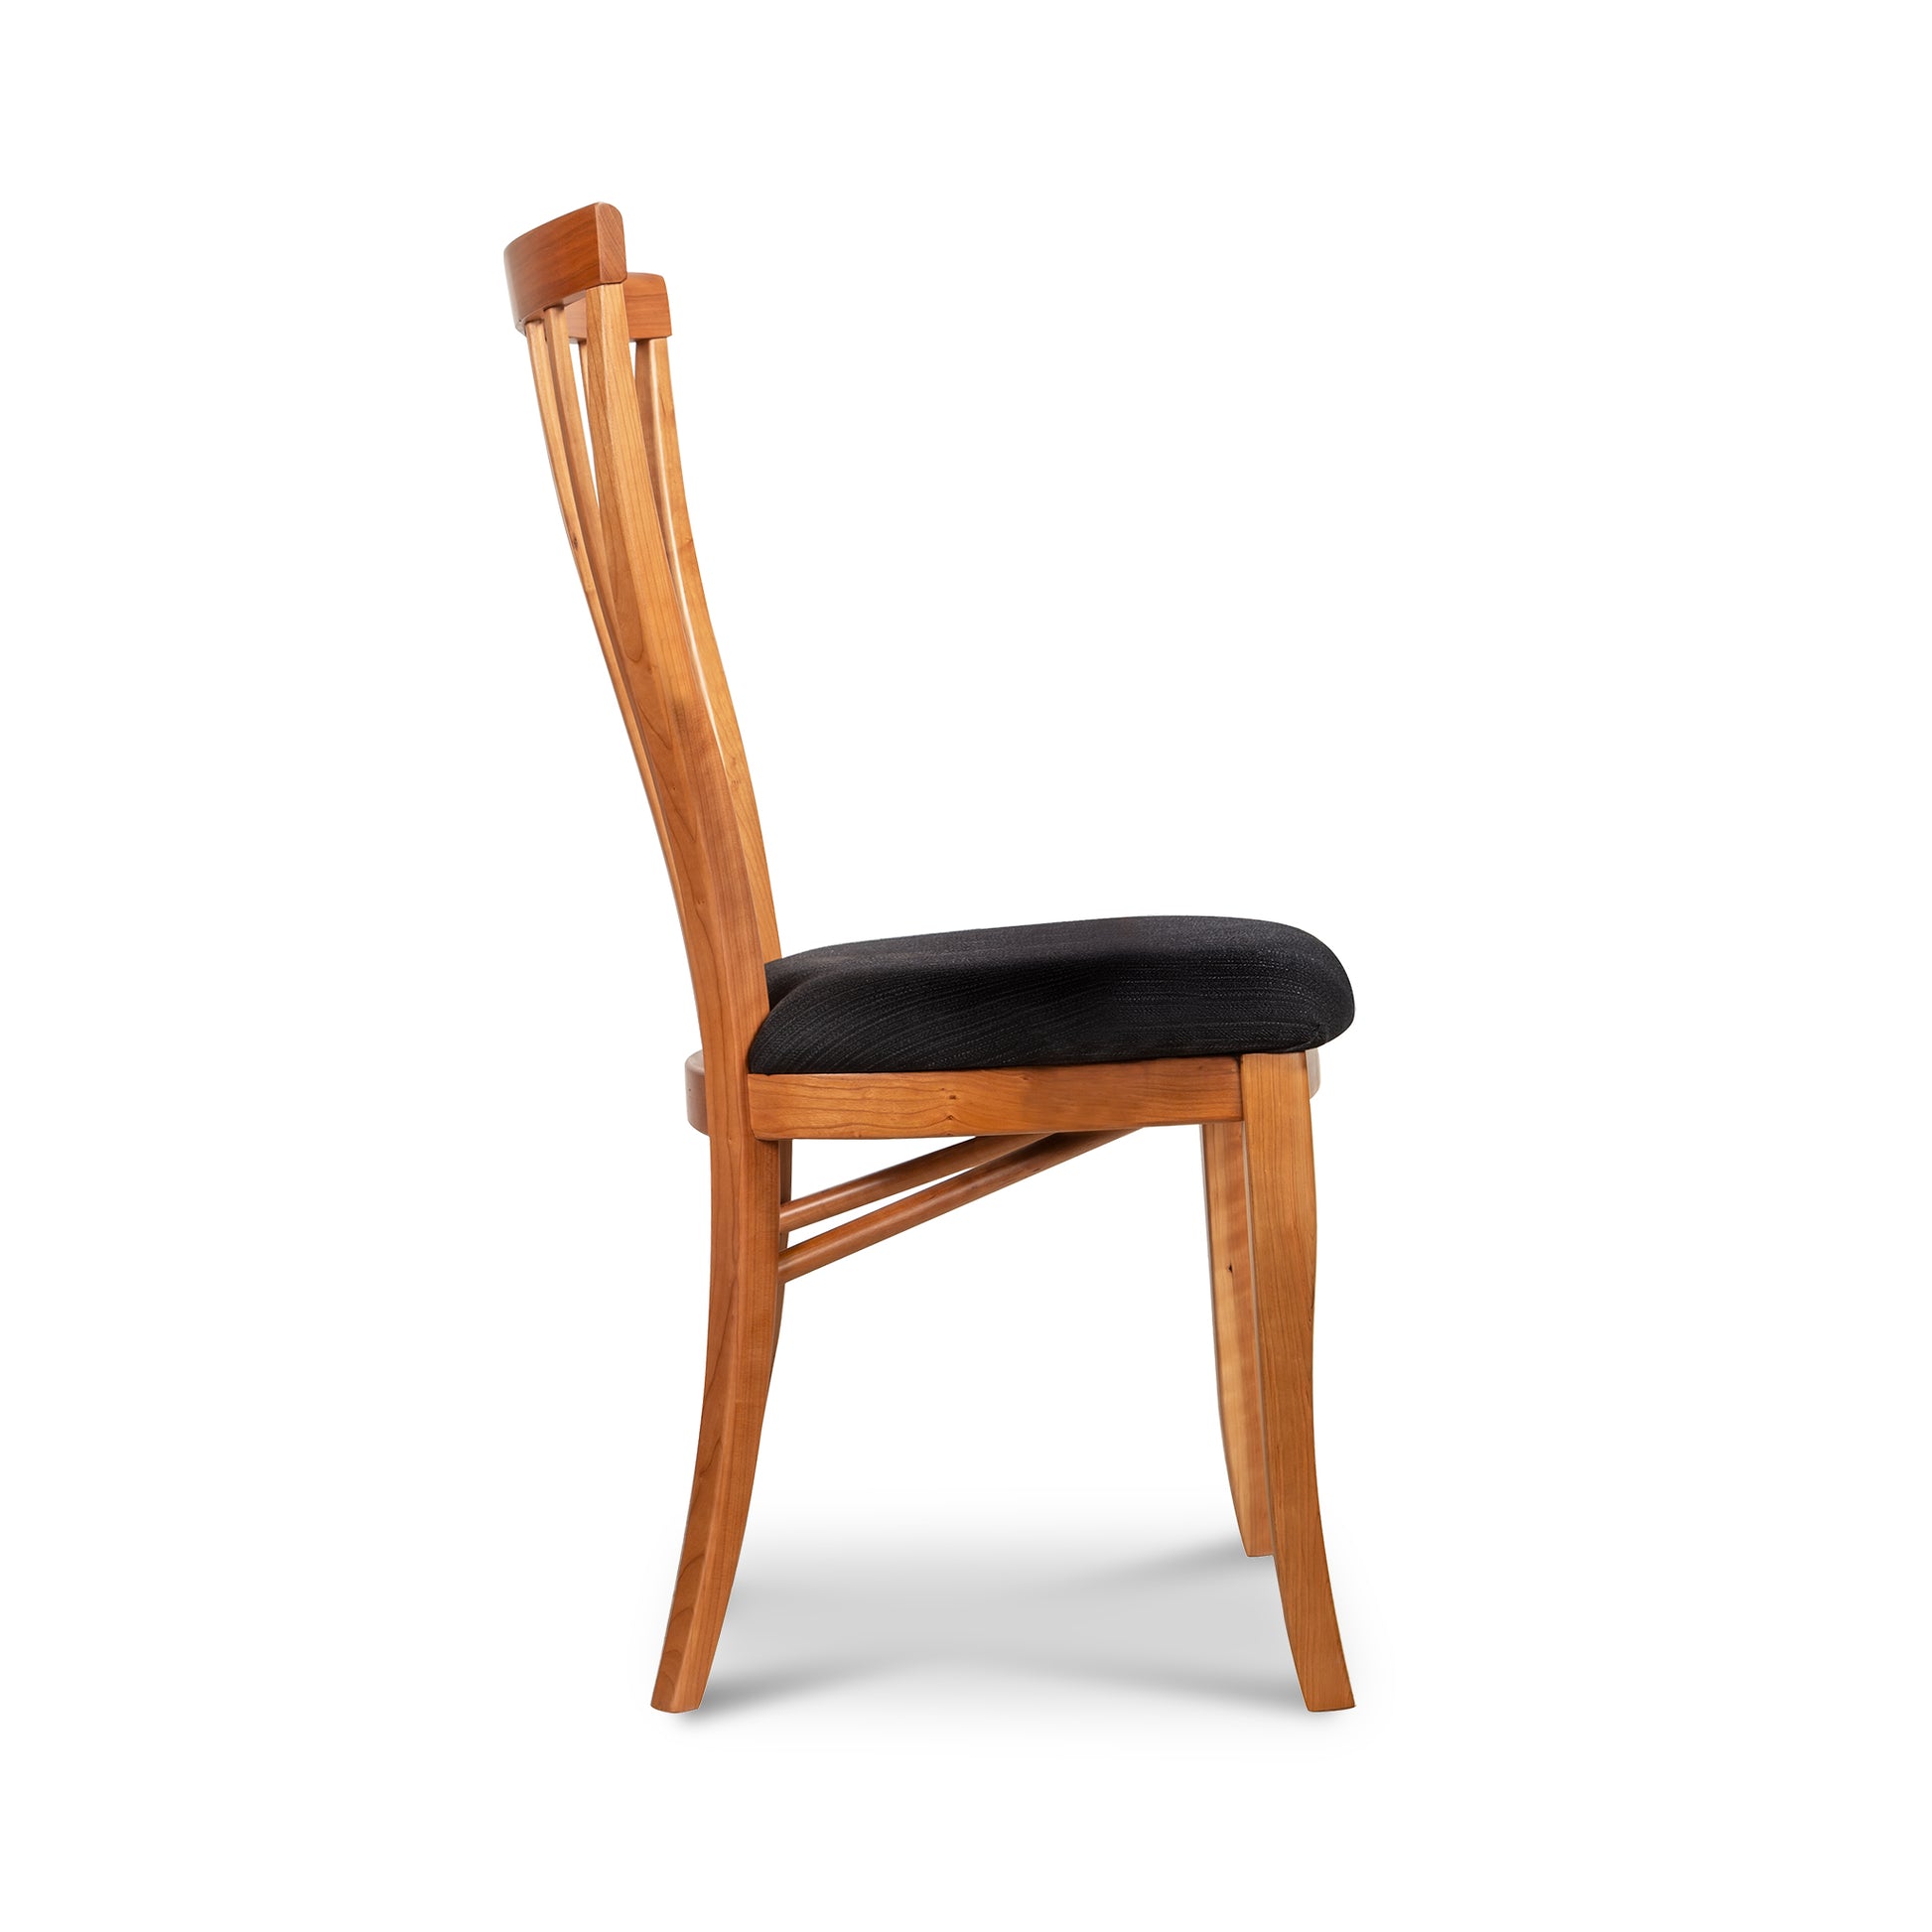 A Classic Shaker Chair #1 made from natural hardwoods with a black upholstered seat by Lyndon Furniture.